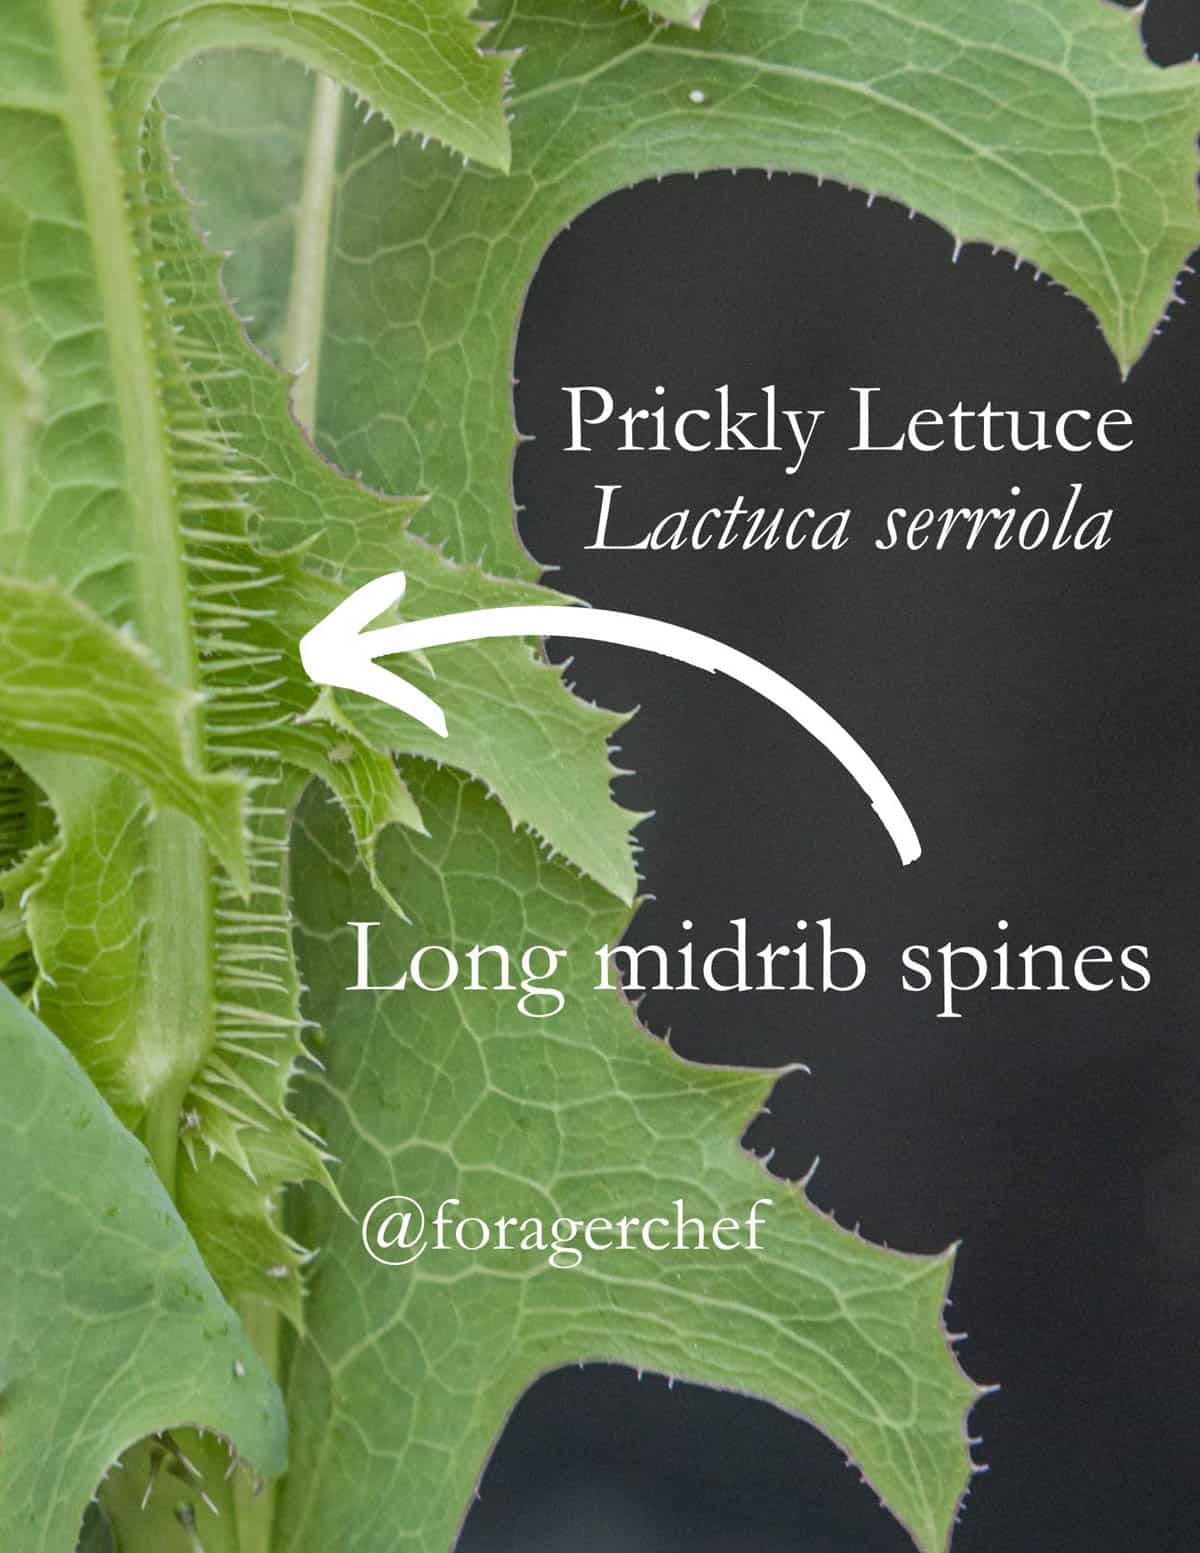 An infographic showing the pronounced spines on the mid rib of common prickly lettuce (Lactuca serriola). 